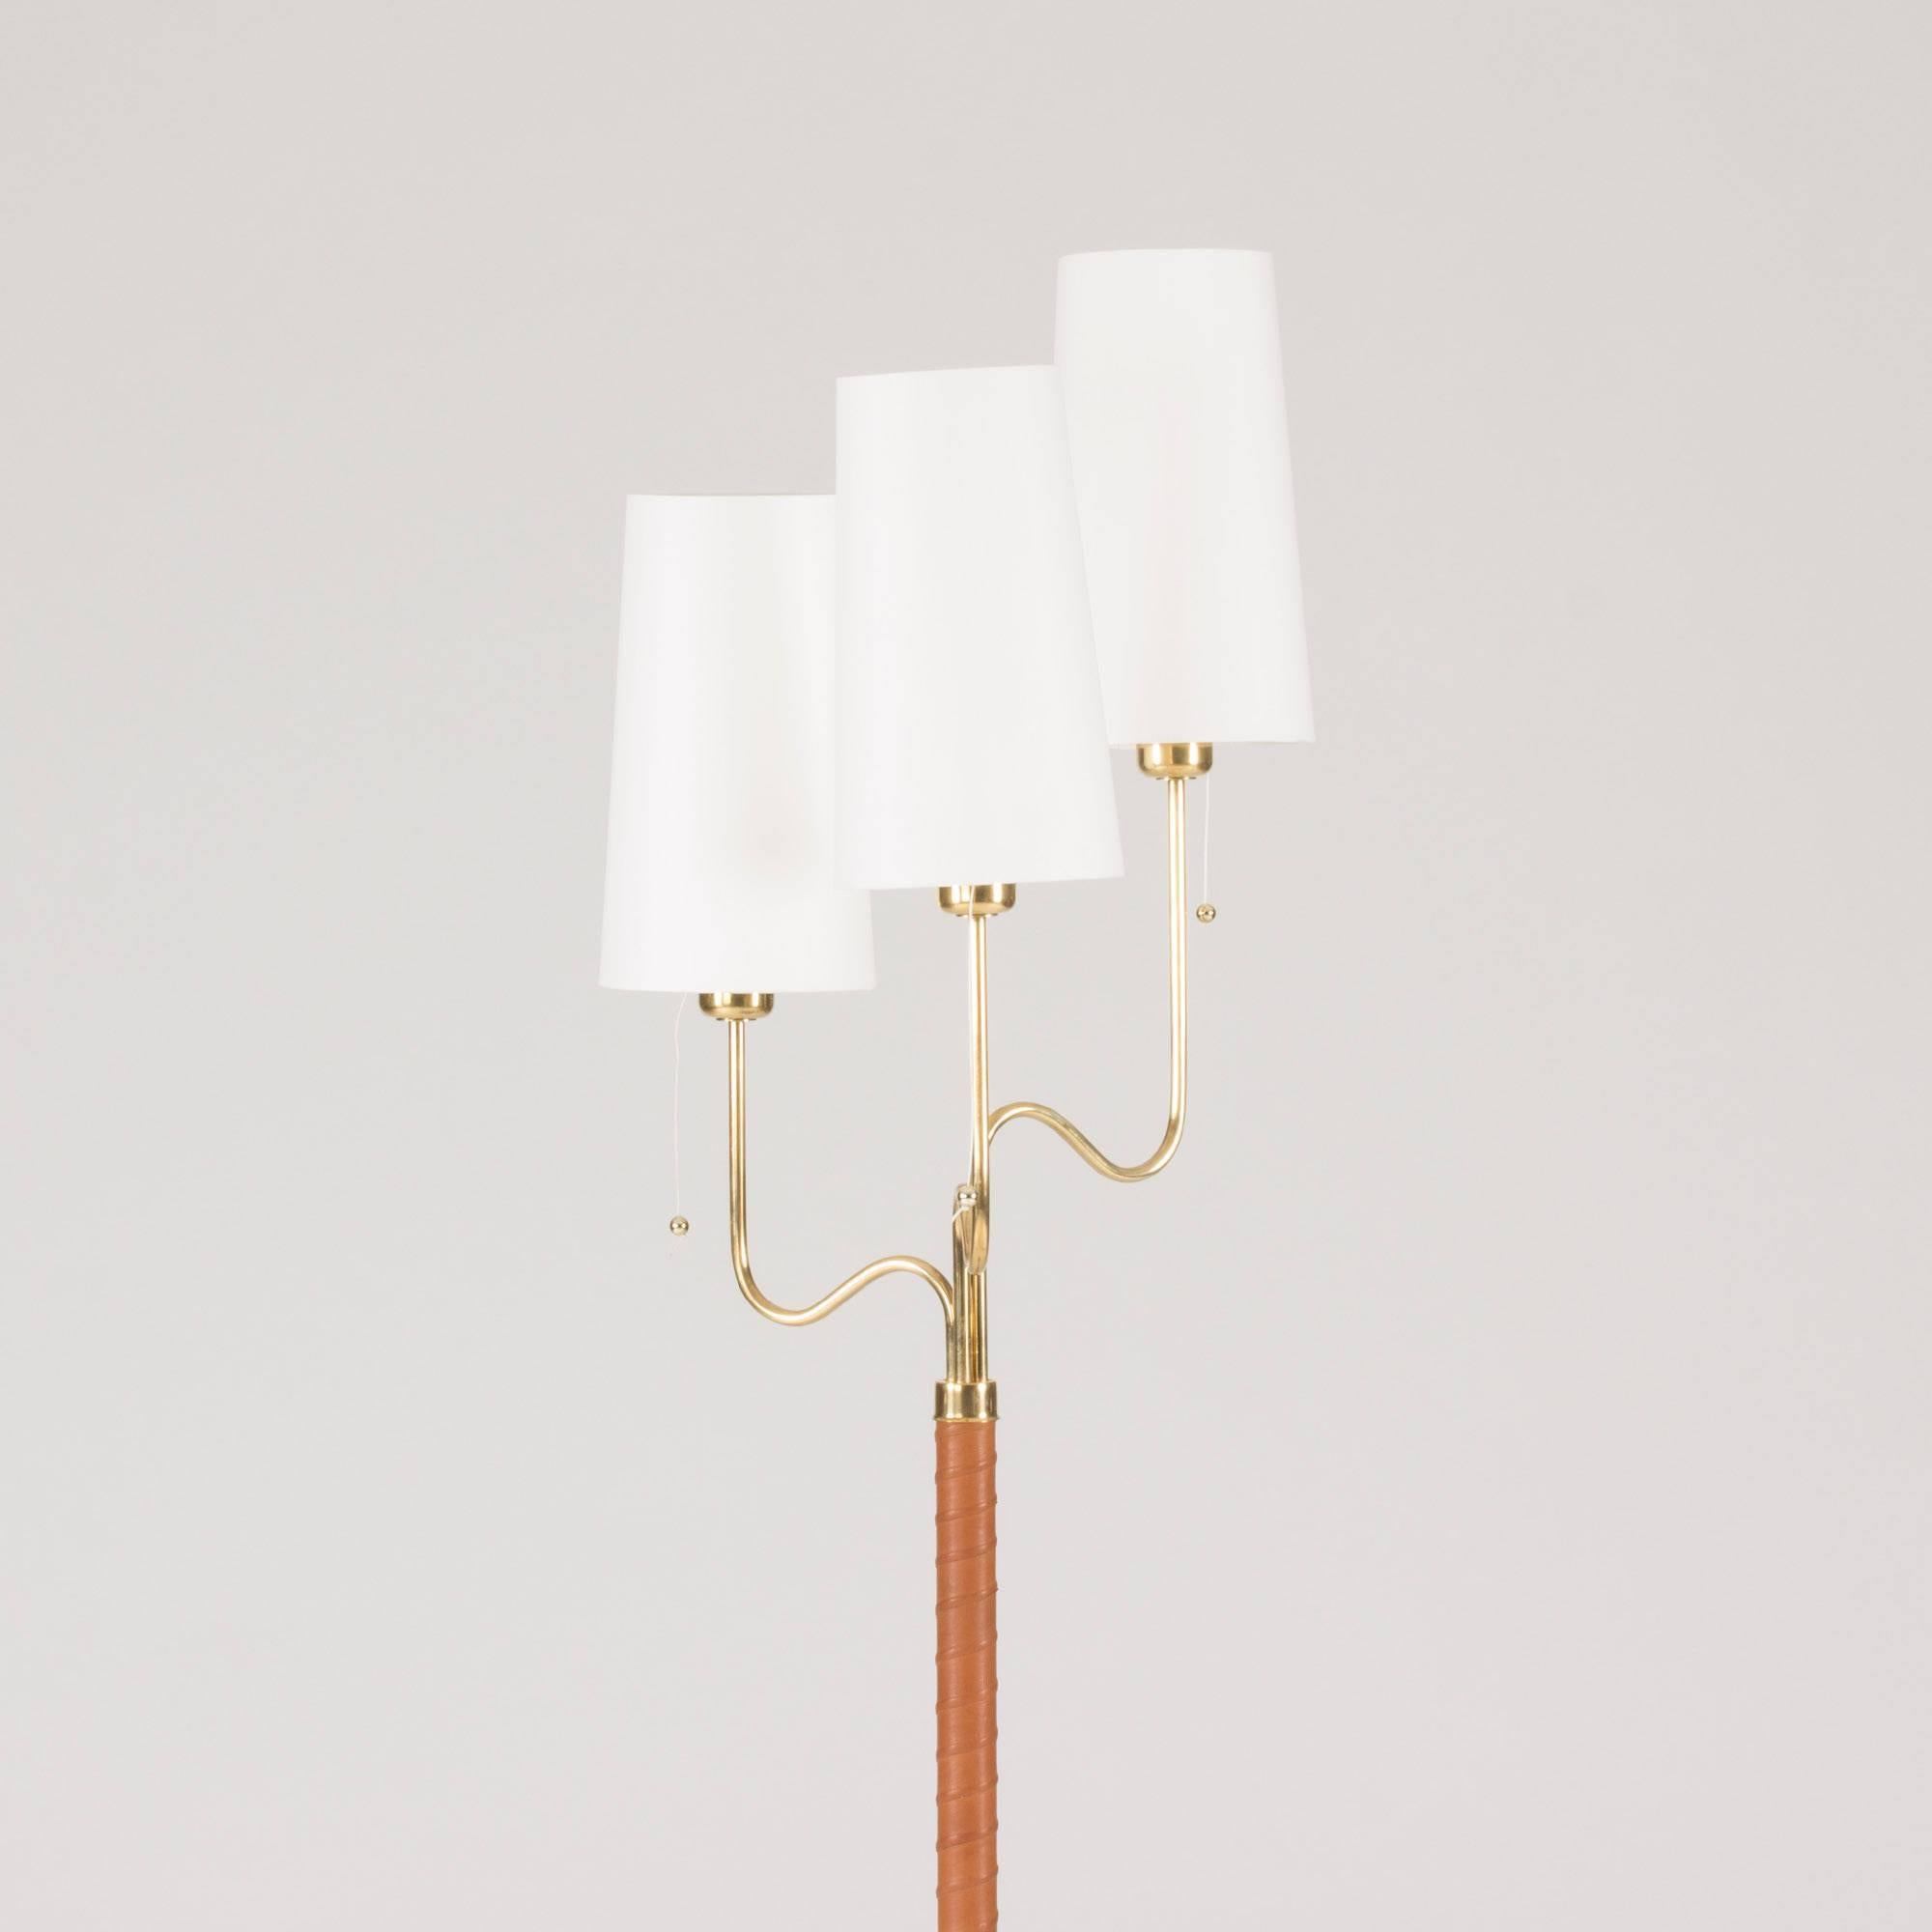 Luxurious brass floor lamp by Hans Bergström with a leather wound pole and three lamps shades set at alternating heights.